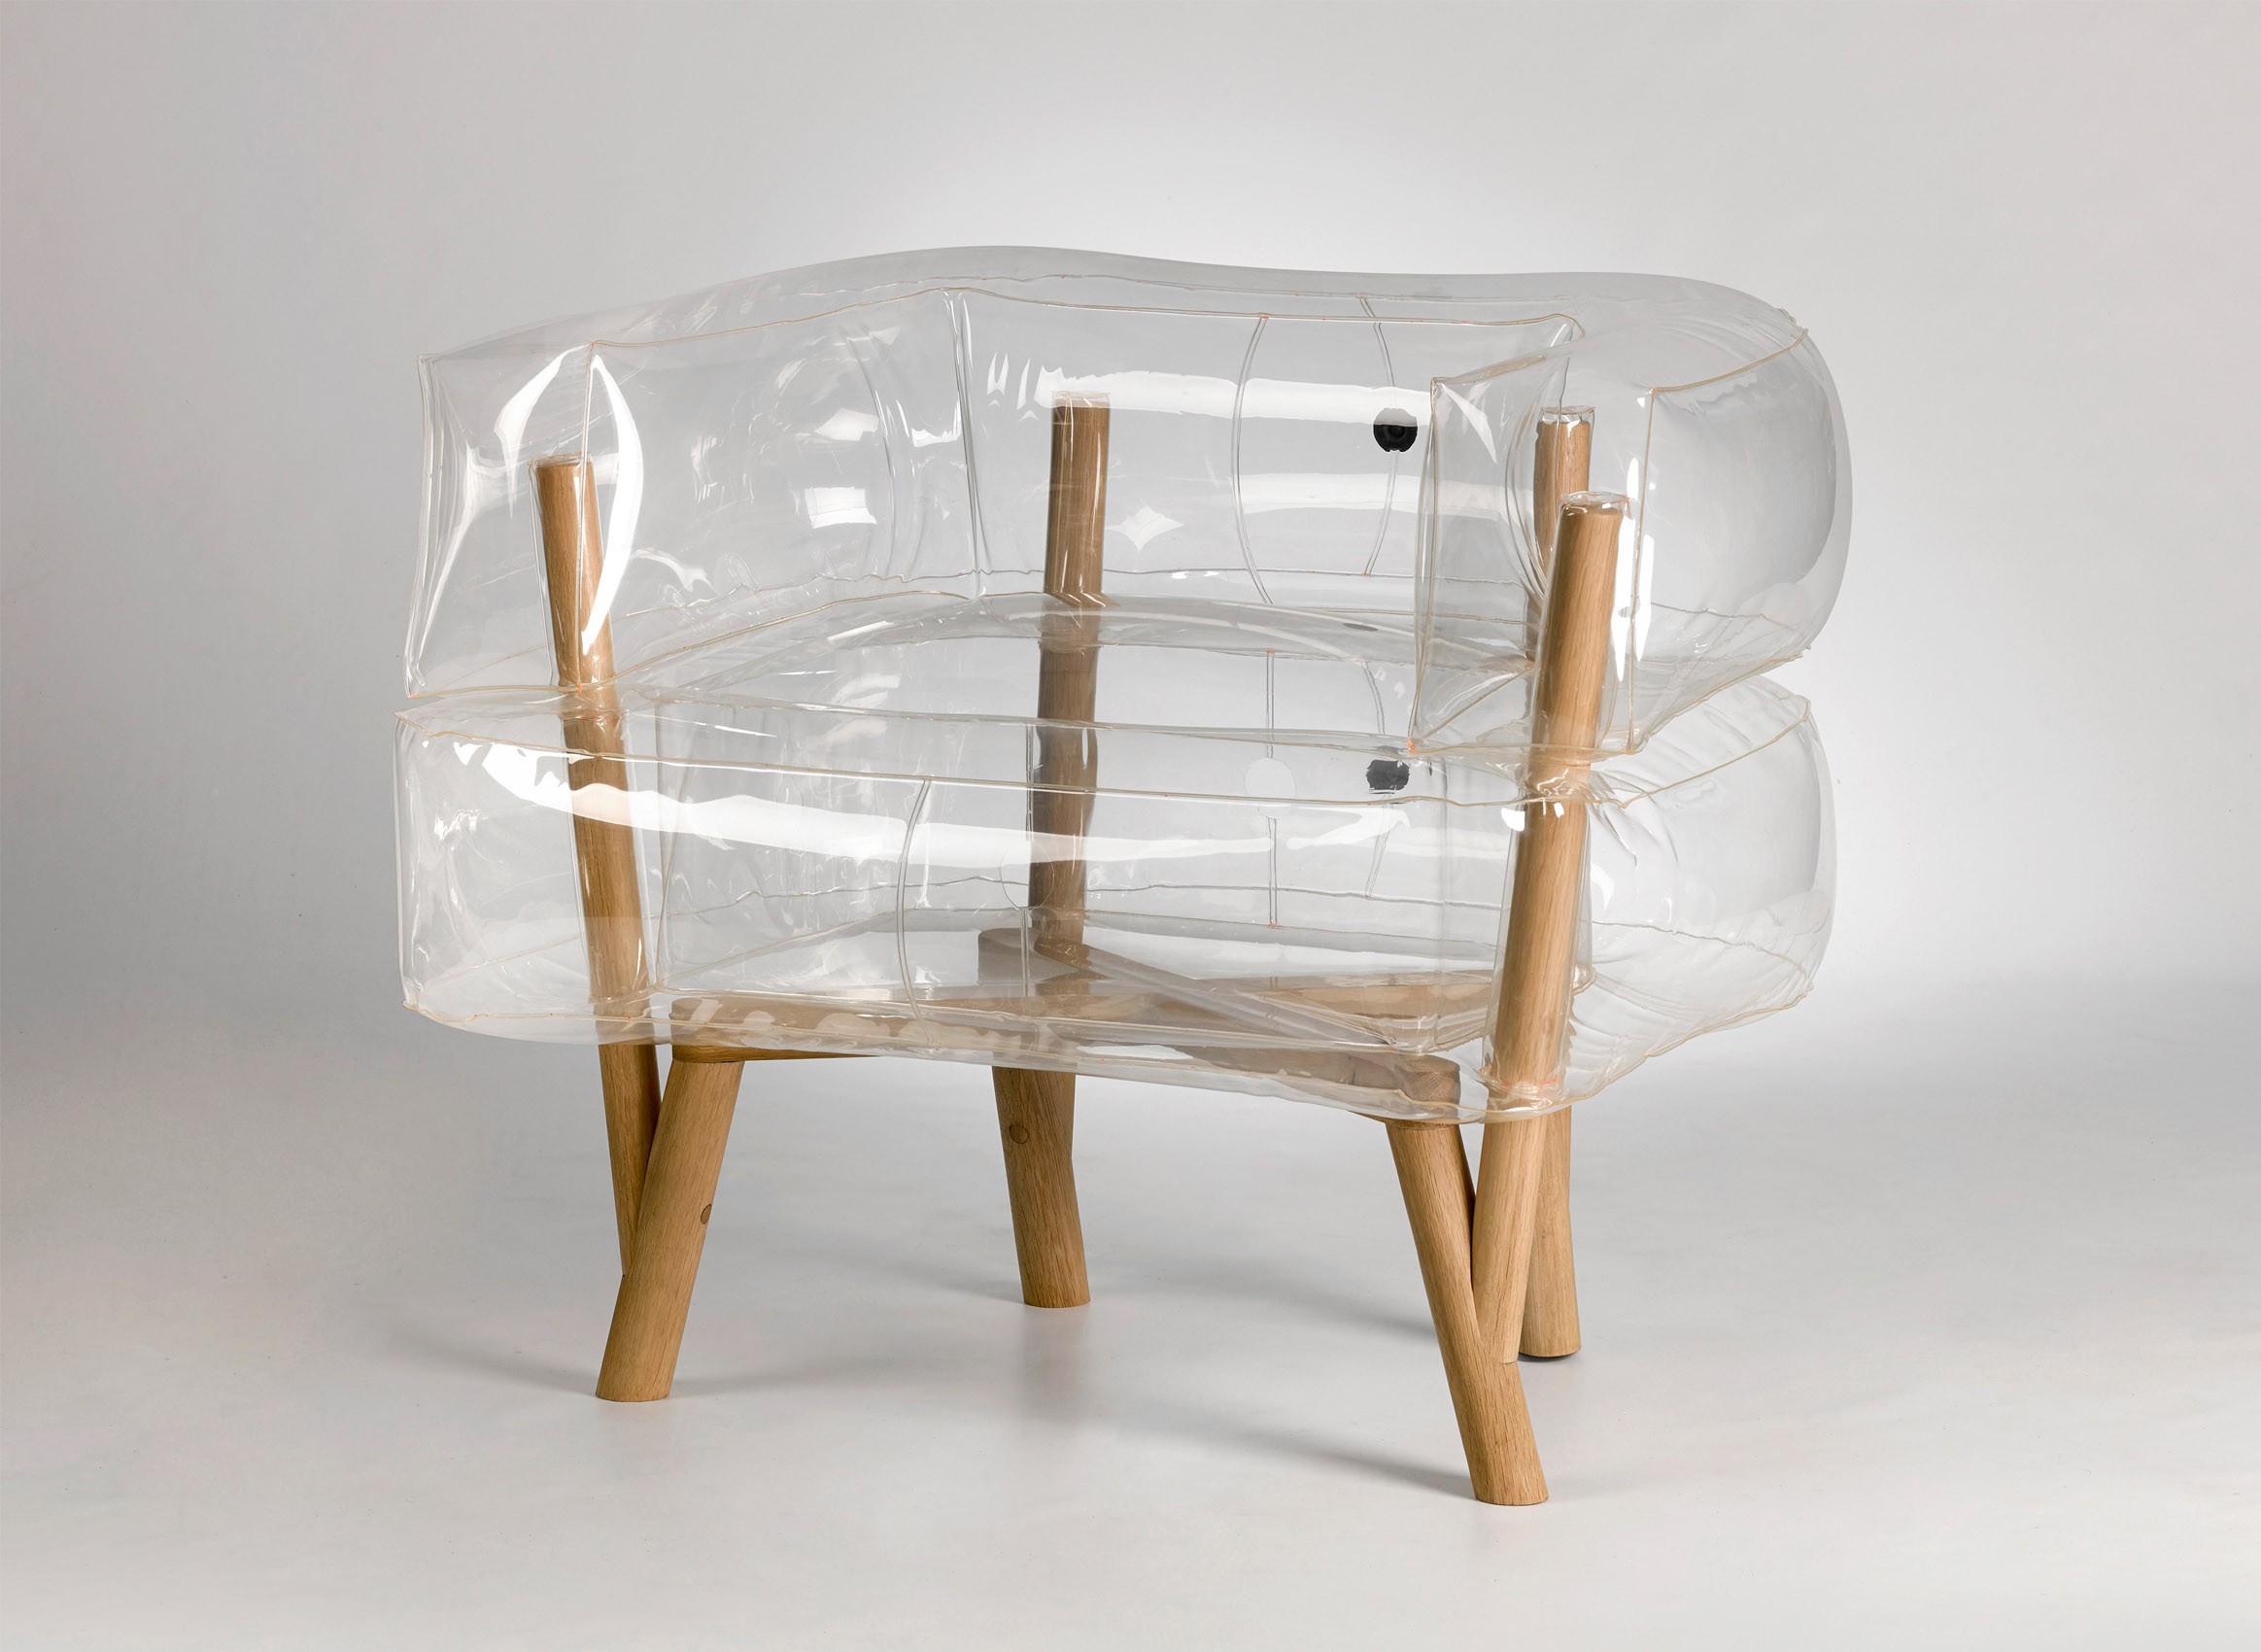 An inflatable chair with a wooden base that rethinks the